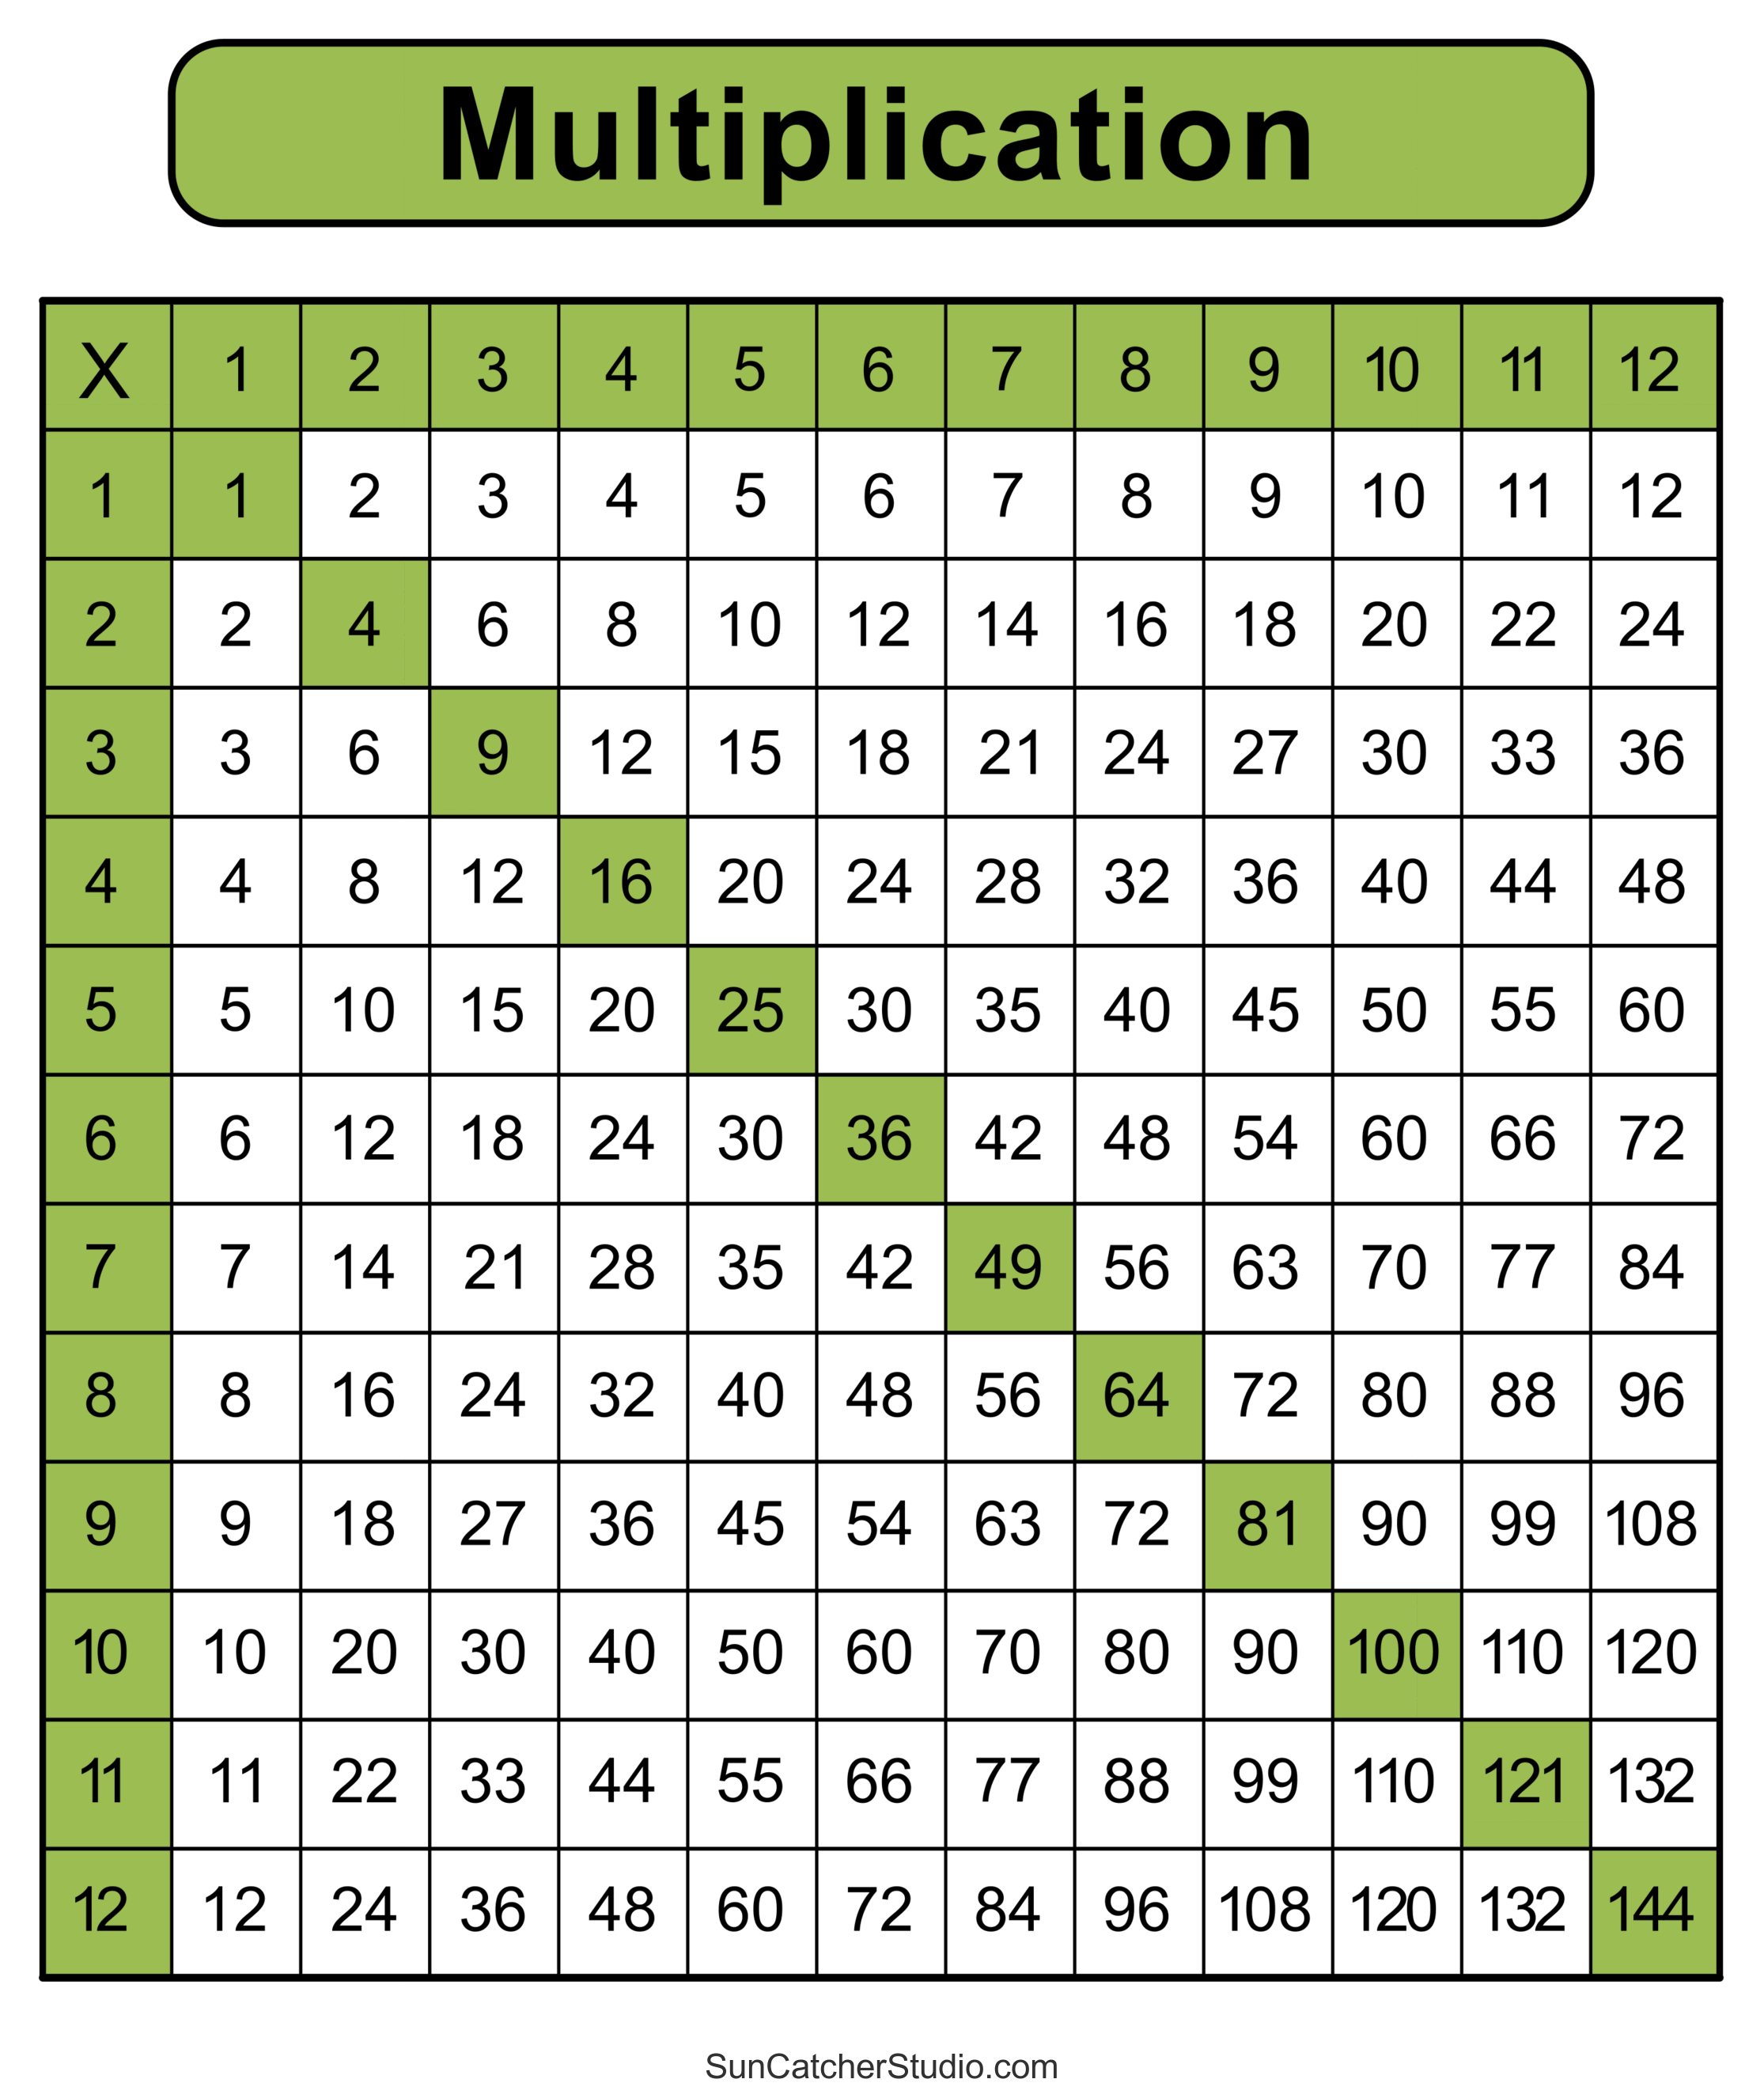 Multiplication Charts (PDF): Free Printable Times Tables – DIY Projects,  Patterns, Monograms, Designs, Templates